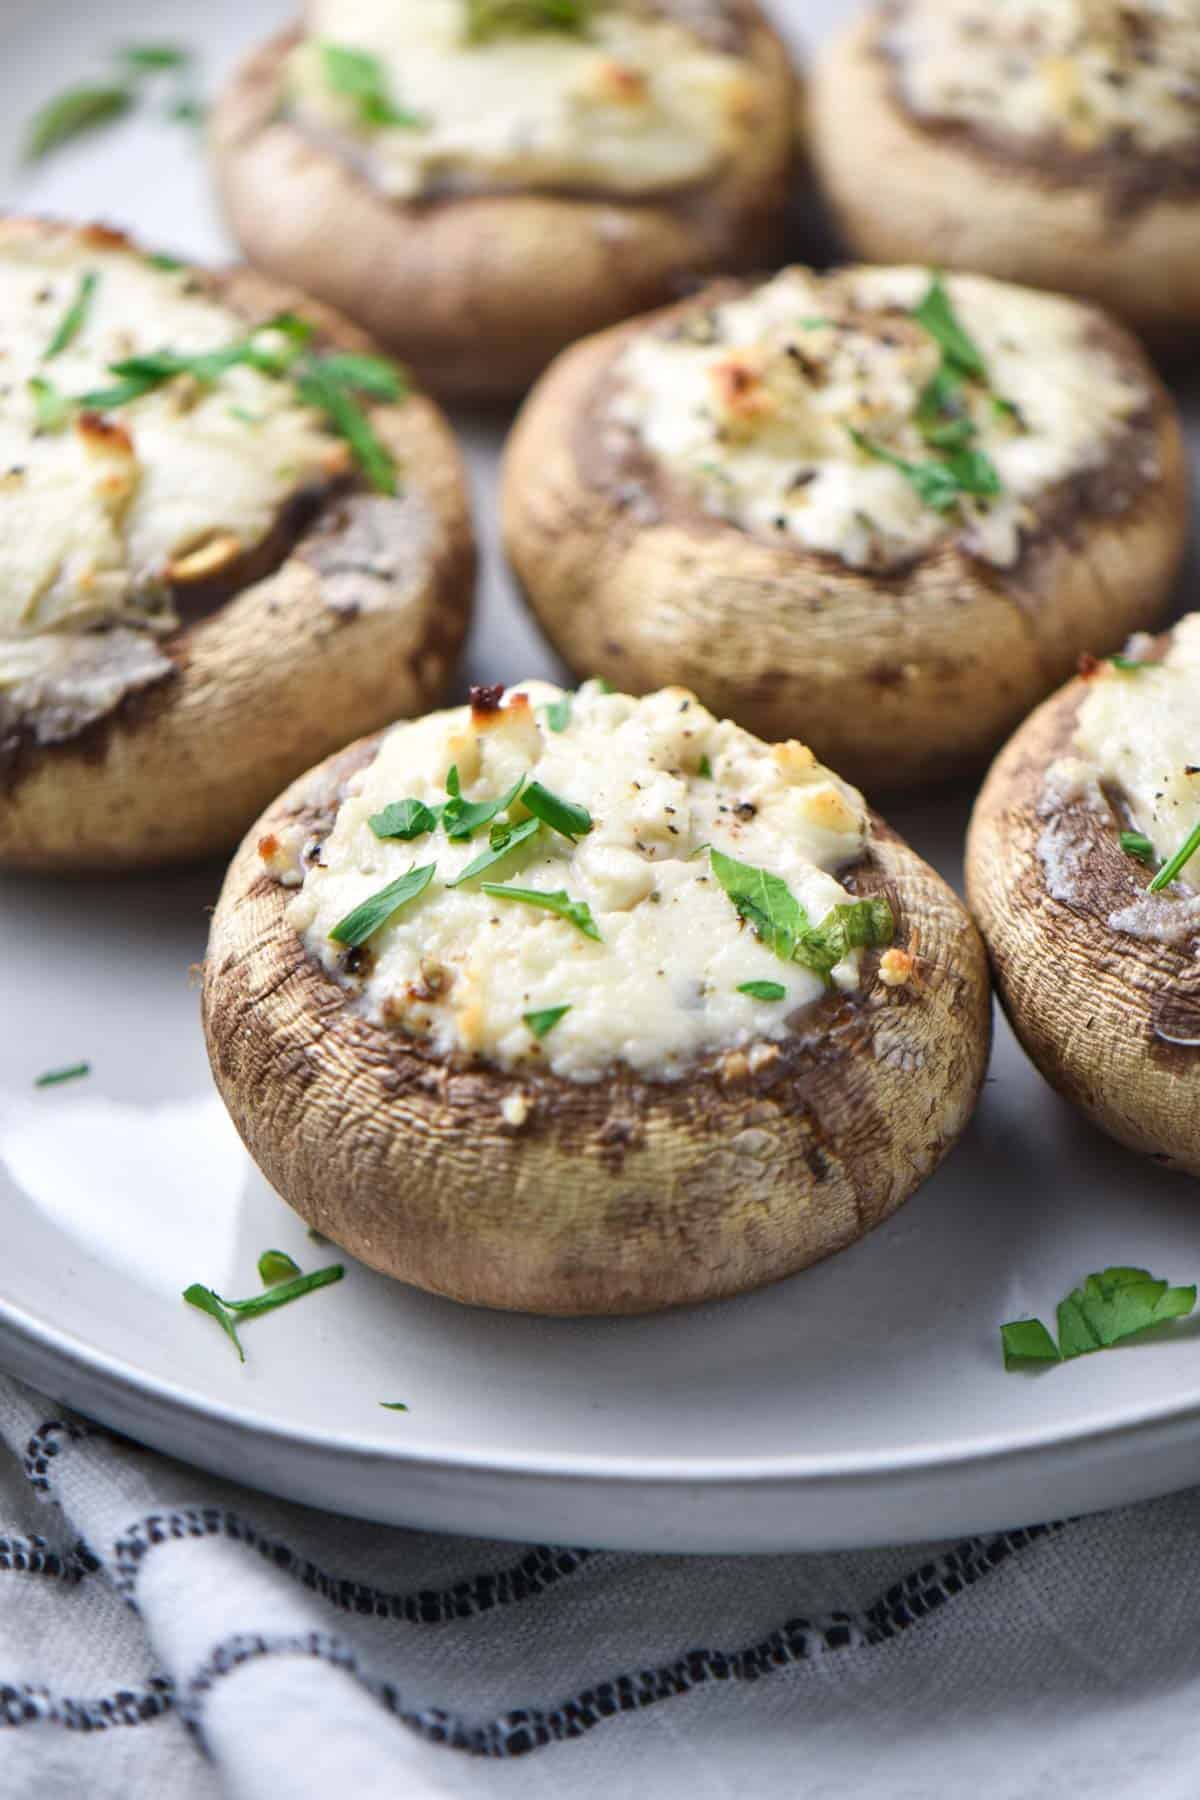 A Boursin stuffed mushroom on a plate with cheese melting off the sides.